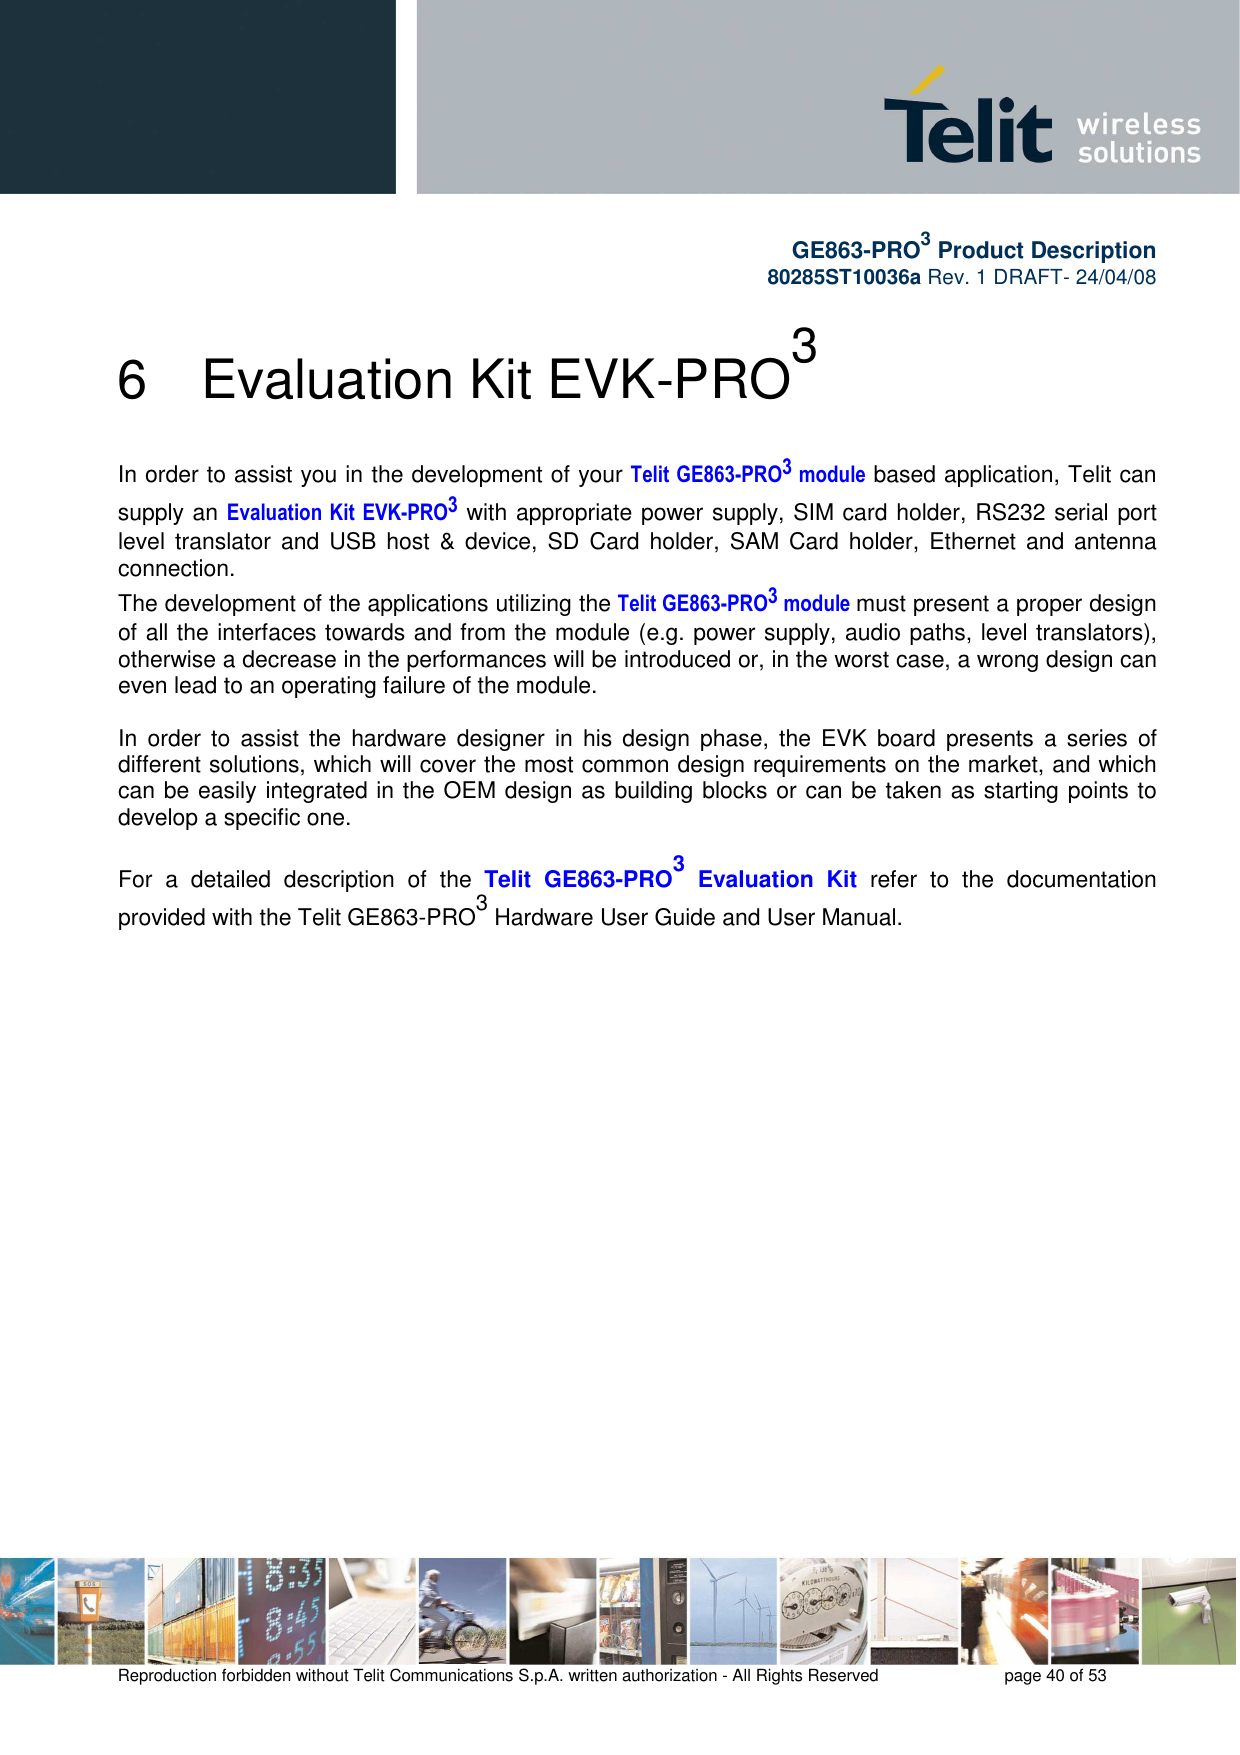       GE863-PRO3 Product Description 80285ST10036a Rev. 1 DRAFT- 24/04/08    Reproduction forbidden without Telit Communications S.p.A. written authorization - All Rights Reserved    page 40 of 53   6  Evaluation Kit EVK-PRO3 In order to assist you in the development of your Telit  GE863-PRO3 module based application, Telit can supply an Evaluation  Kit  EVK-PRO3 with appropriate power supply, SIM card holder, RS232 serial port level translator  and USB  host &amp;  device,  SD  Card holder,  SAM  Card holder, Ethernet  and antenna connection. The development of the applications utilizing the Telit GE863-PRO3 module must present a proper design of all the interfaces towards and from the module (e.g. power supply, audio paths, level translators), otherwise a decrease in the performances will be introduced or, in the worst case, a wrong design can even lead to an operating failure of the module.  In  order to  assist the  hardware  designer in  his design  phase,  the EVK  board  presents  a  series  of different solutions, which will cover the most common design requirements on the market, and which can be easily integrated in the OEM design as building blocks or can be taken as starting points to develop a specific one.  For  a  detailed  description  of  the  Telit  GE863-PRO3  Evaluation  Kit  refer  to  the  documentation provided with the Telit GE863-PRO3 Hardware User Guide and User Manual.  